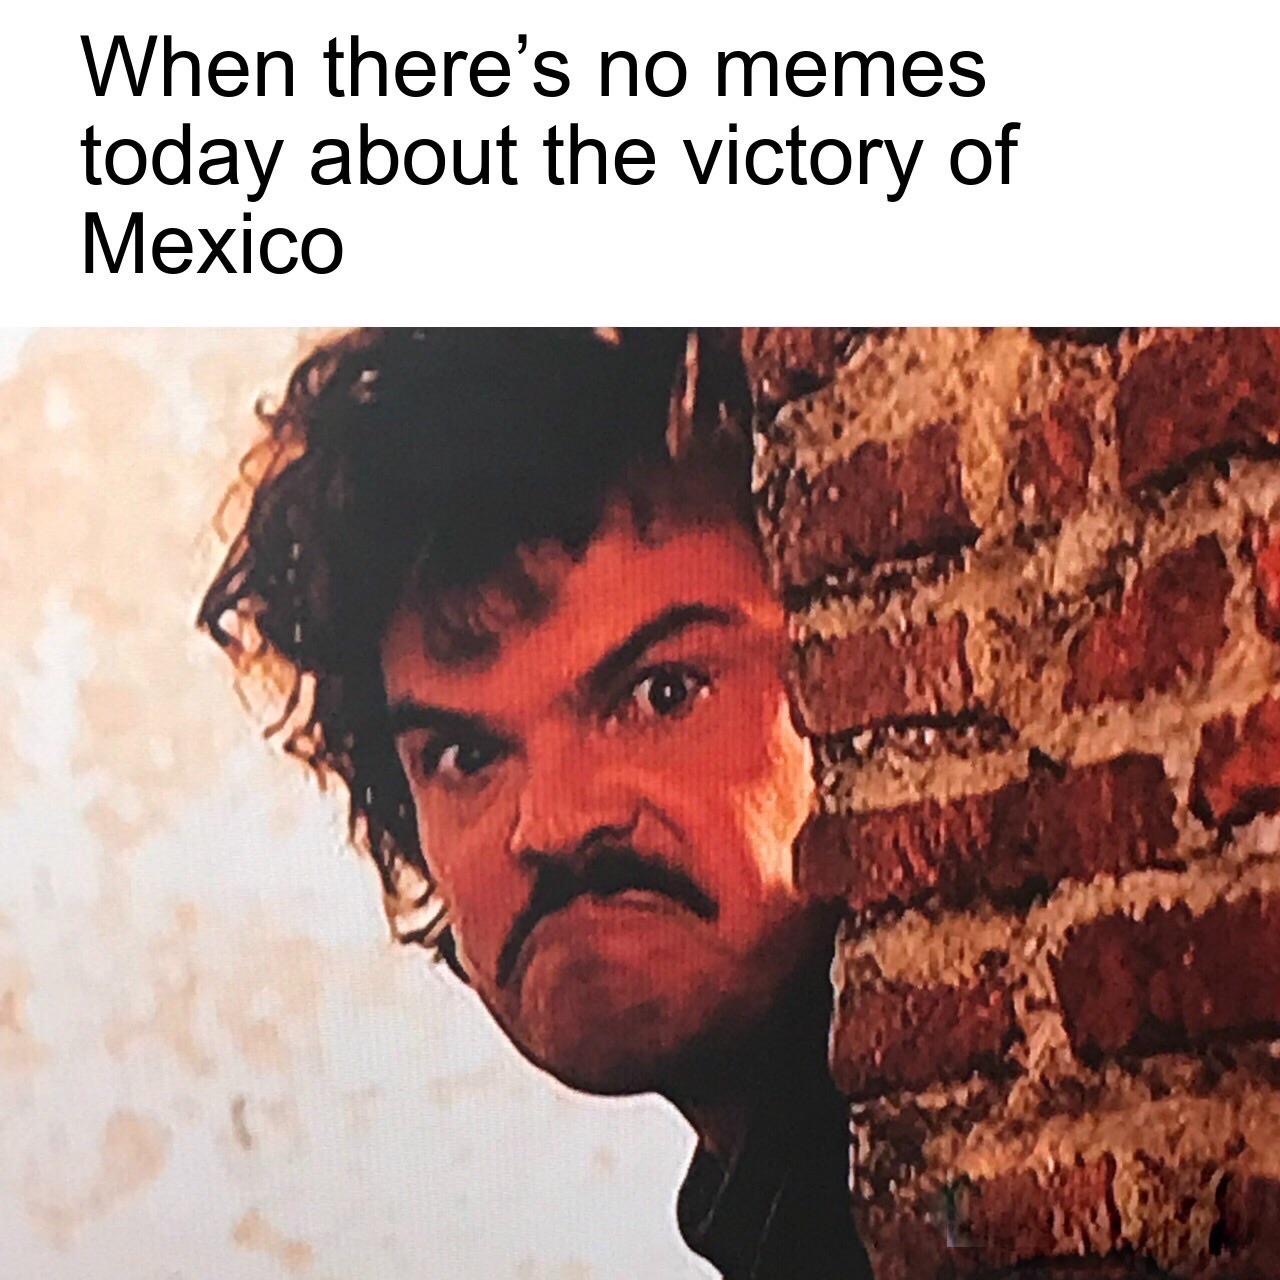 album cover - When there's no memes today about the victory of Mexico